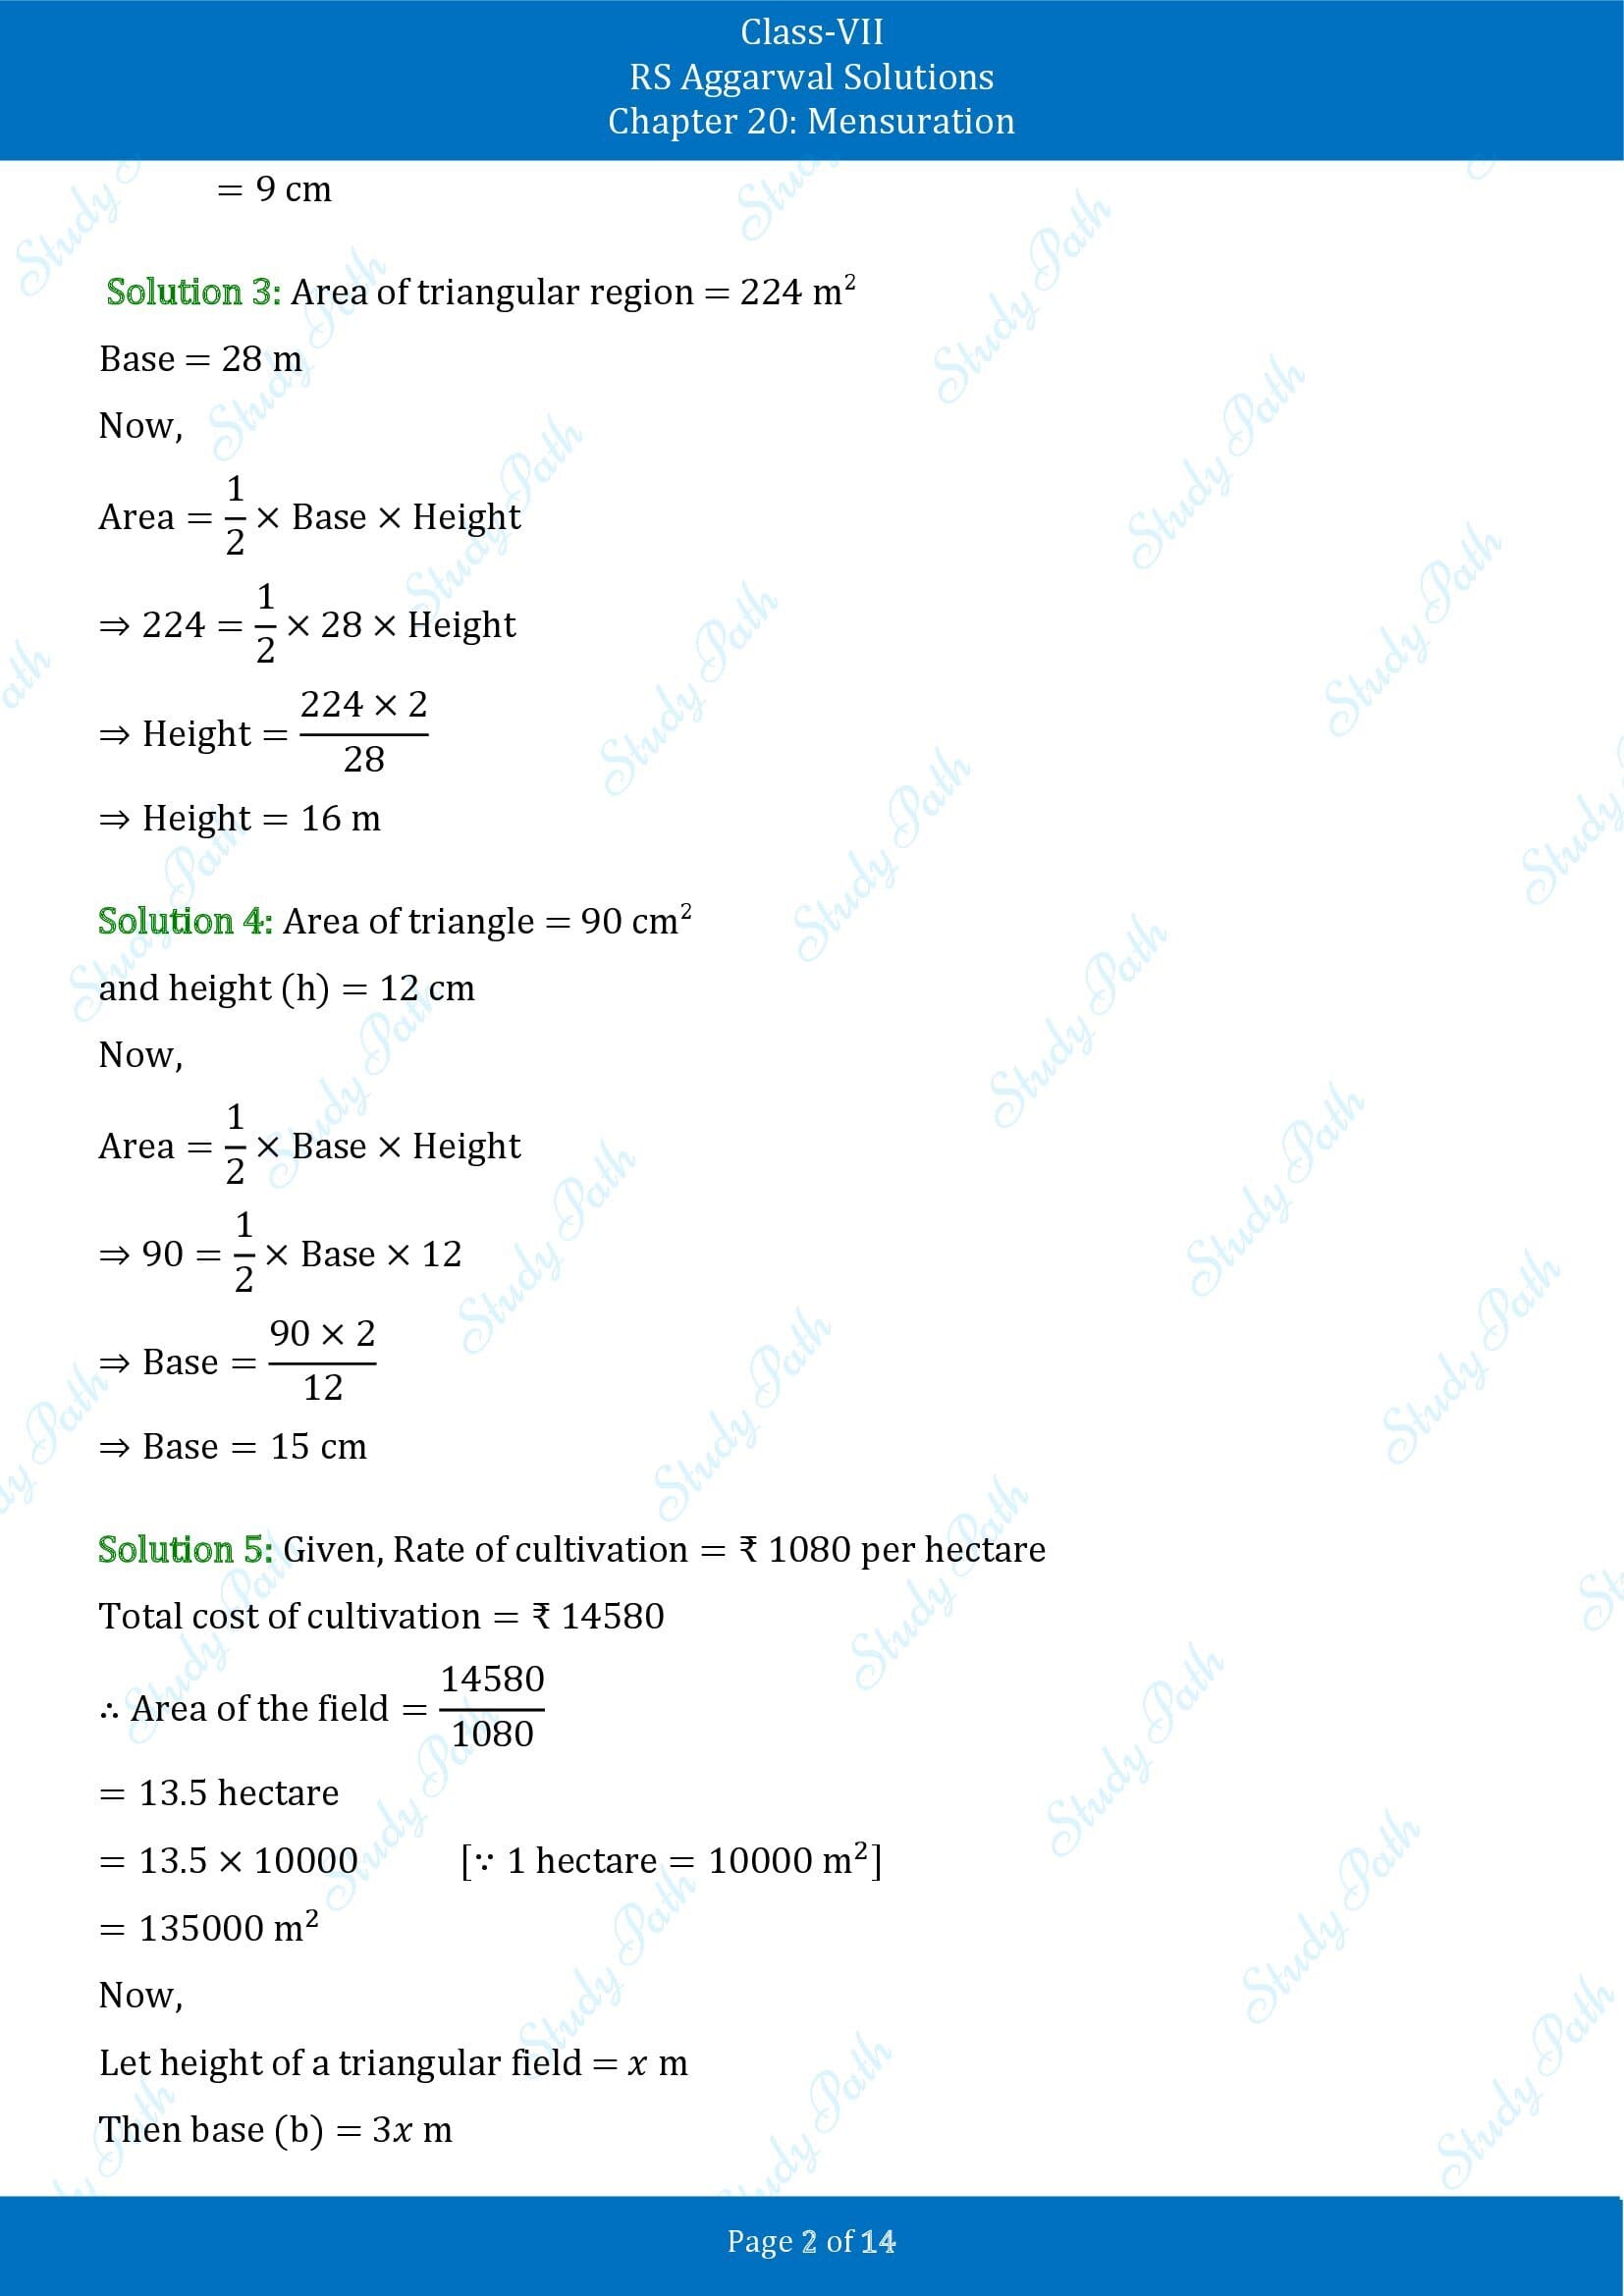 RS Aggarwal Solutions Class 7 Chapter 20 Mensuration Exercise 20D 00002